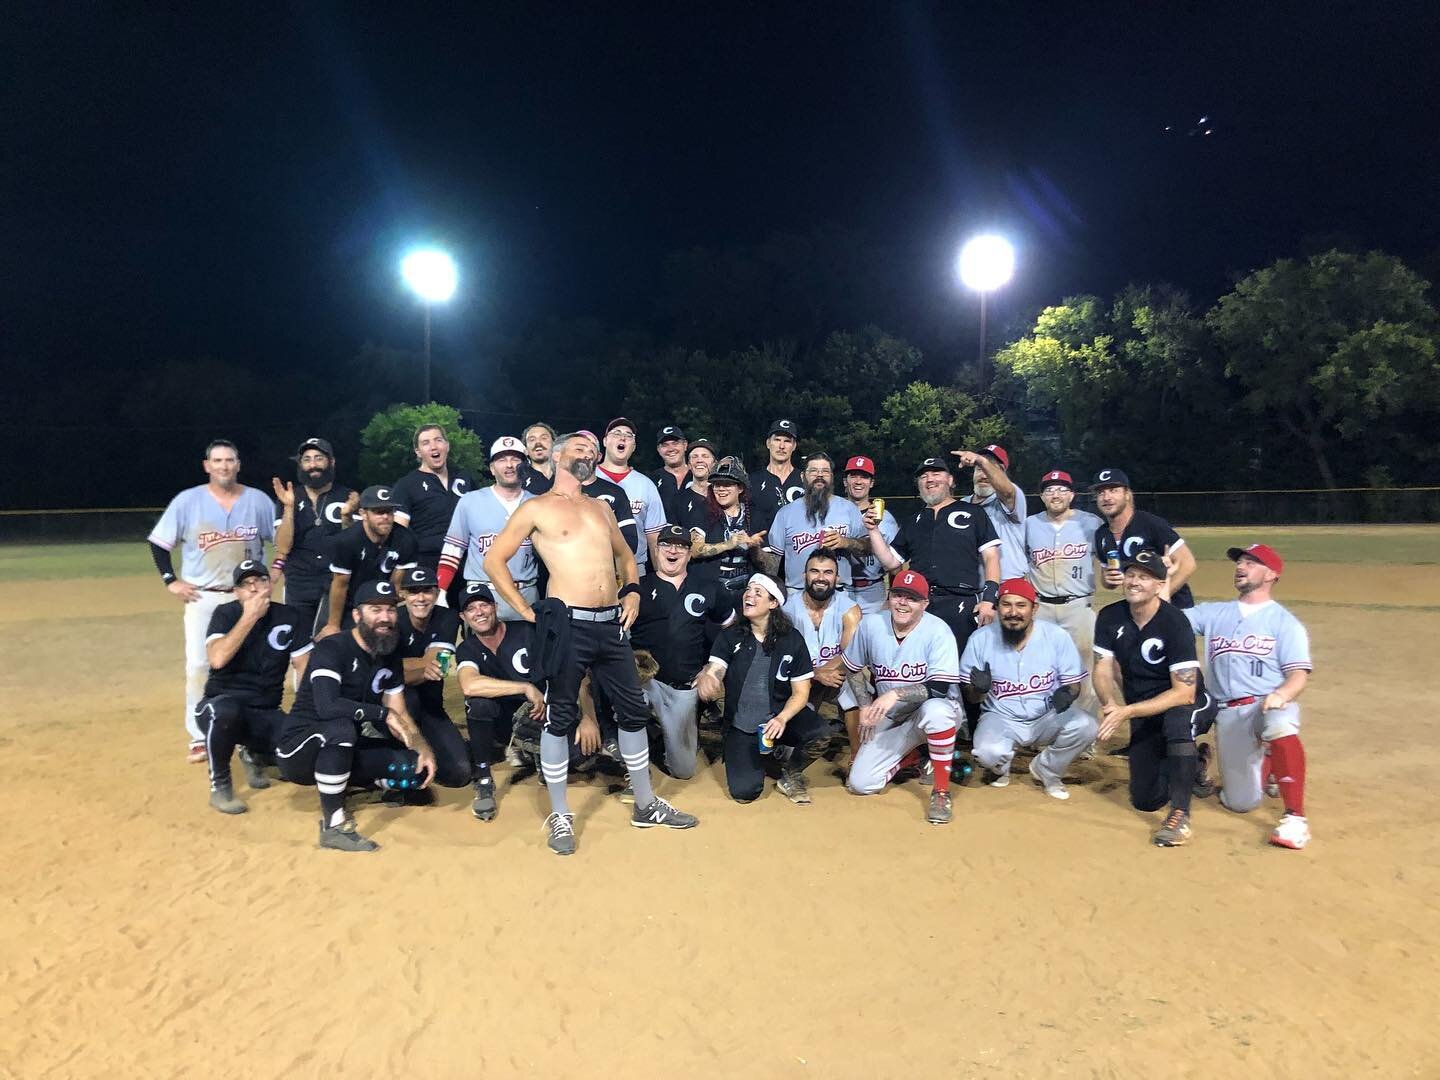 HUGE shoutout to the @tulsacityjesters for making the trek to Austin and for being total badasses ✌️

It was an honor to take the field with y&rsquo;all and play some ball under the lights. 

Not sure what was more sore after this game, my legs or my